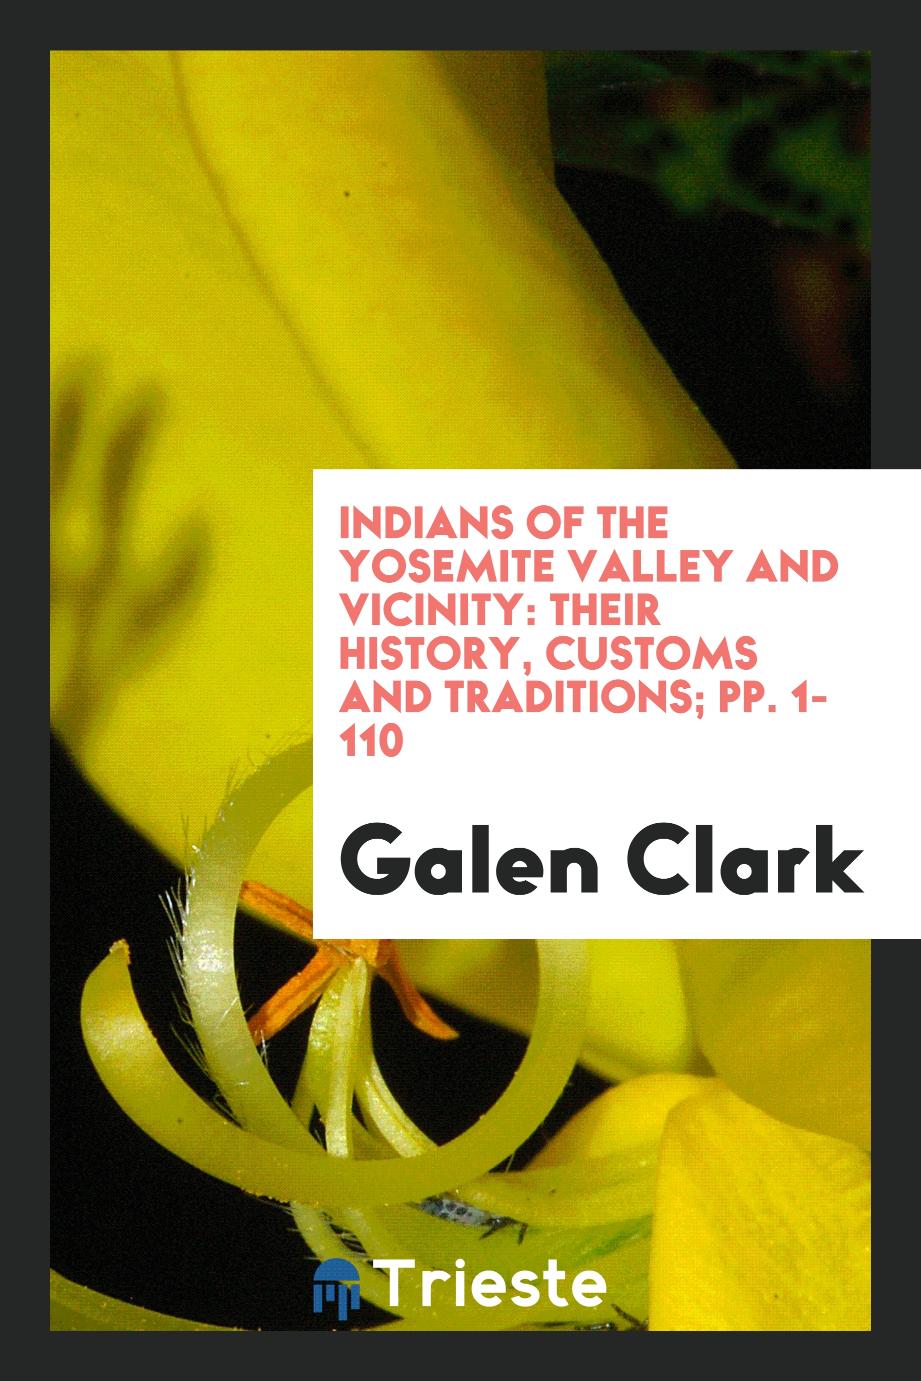 Indians of the Yosemite Valley and Vicinity: Their History, Customs and Traditions; pp. 1-110